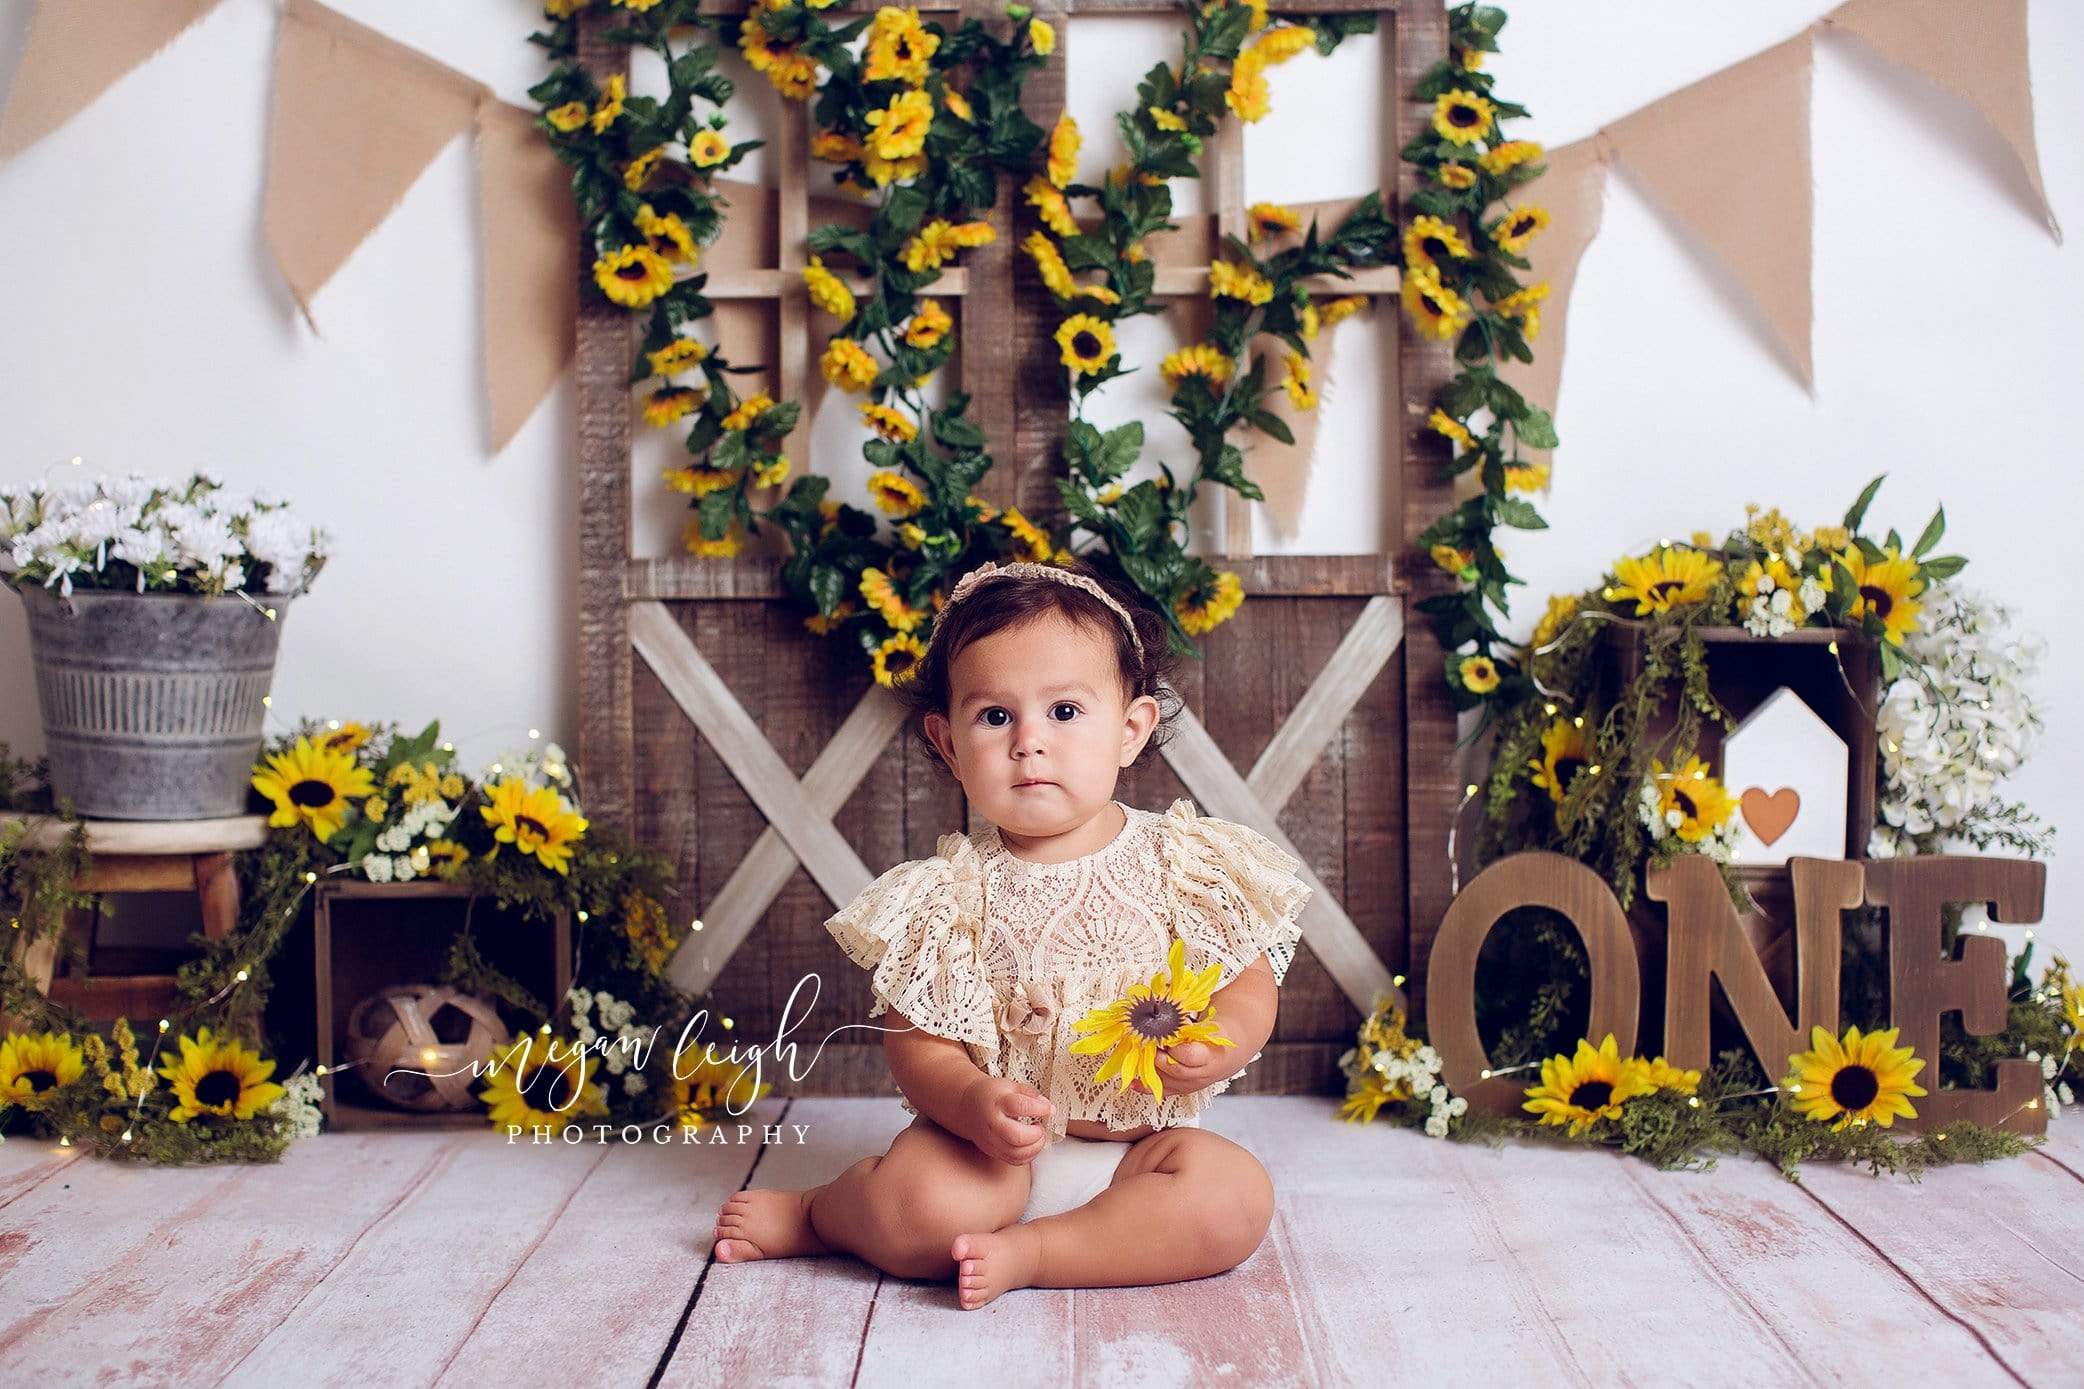 Kate Spring Sunflower Barn Door Decoration Backdrop Designed by Megan Leigh Photography